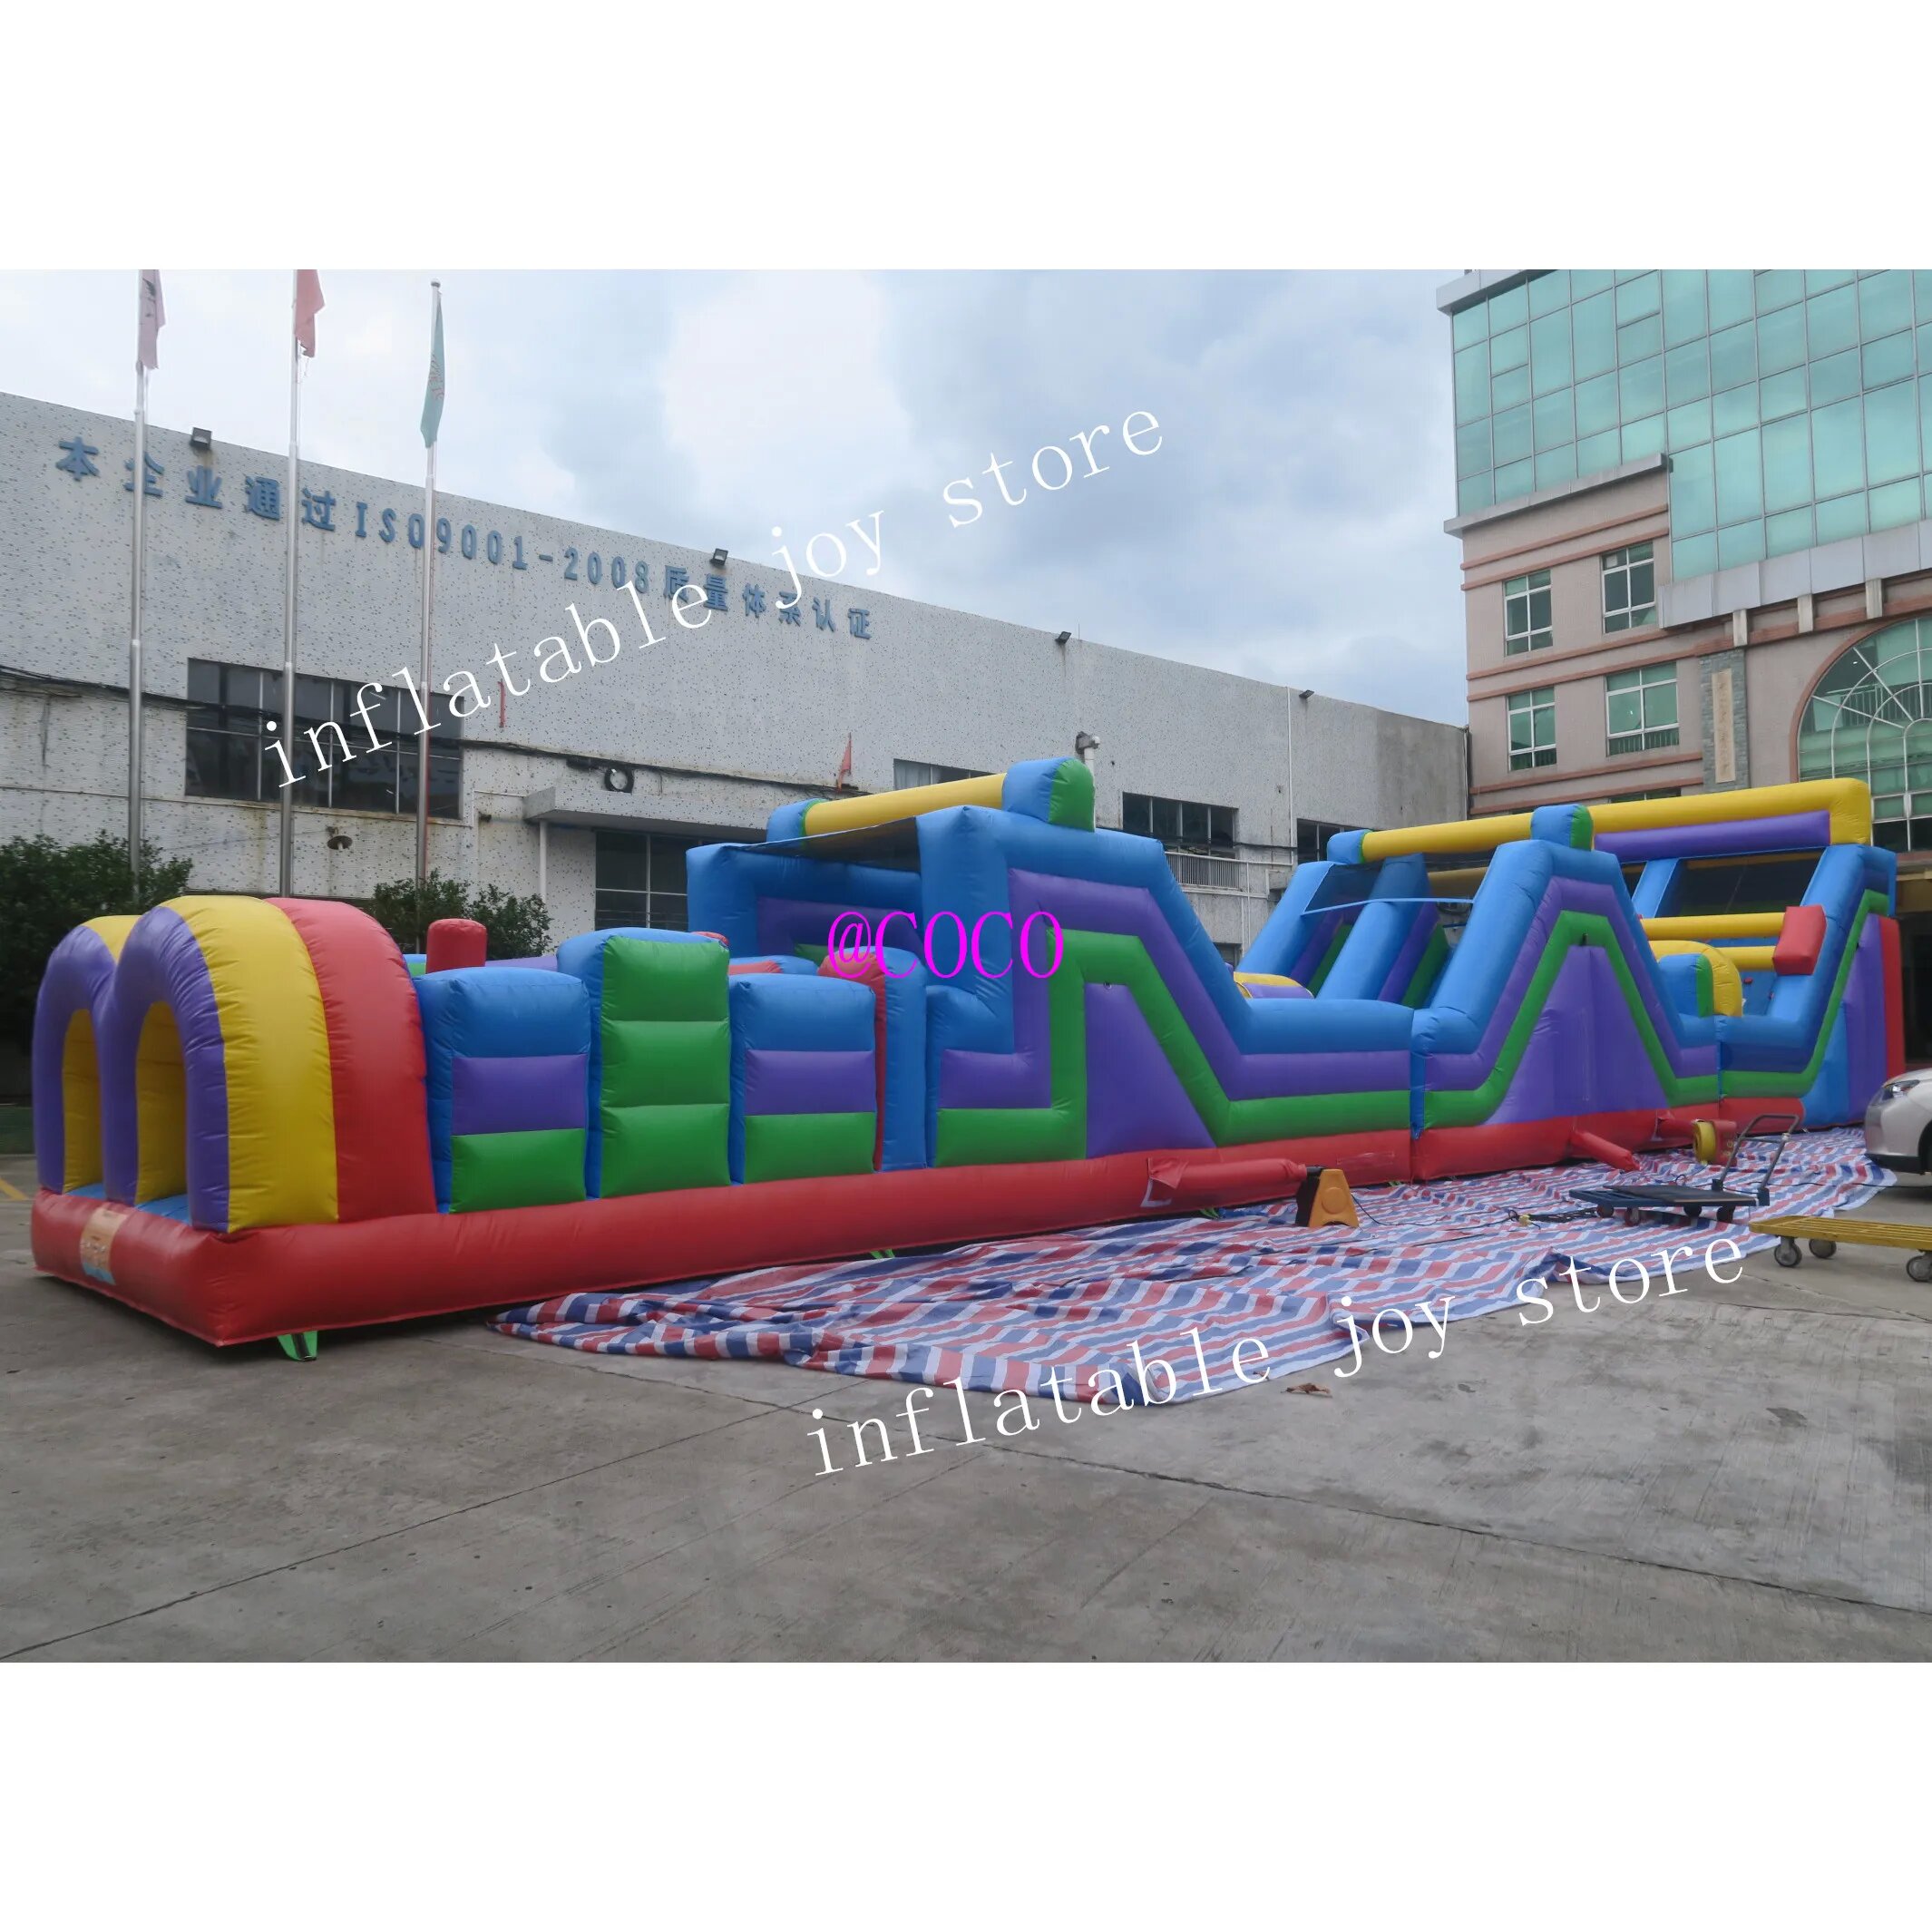 free ship to sea port, 25x4.5m giant ultimate Challenge inflatable obstacle game/ obstacle course for team work building